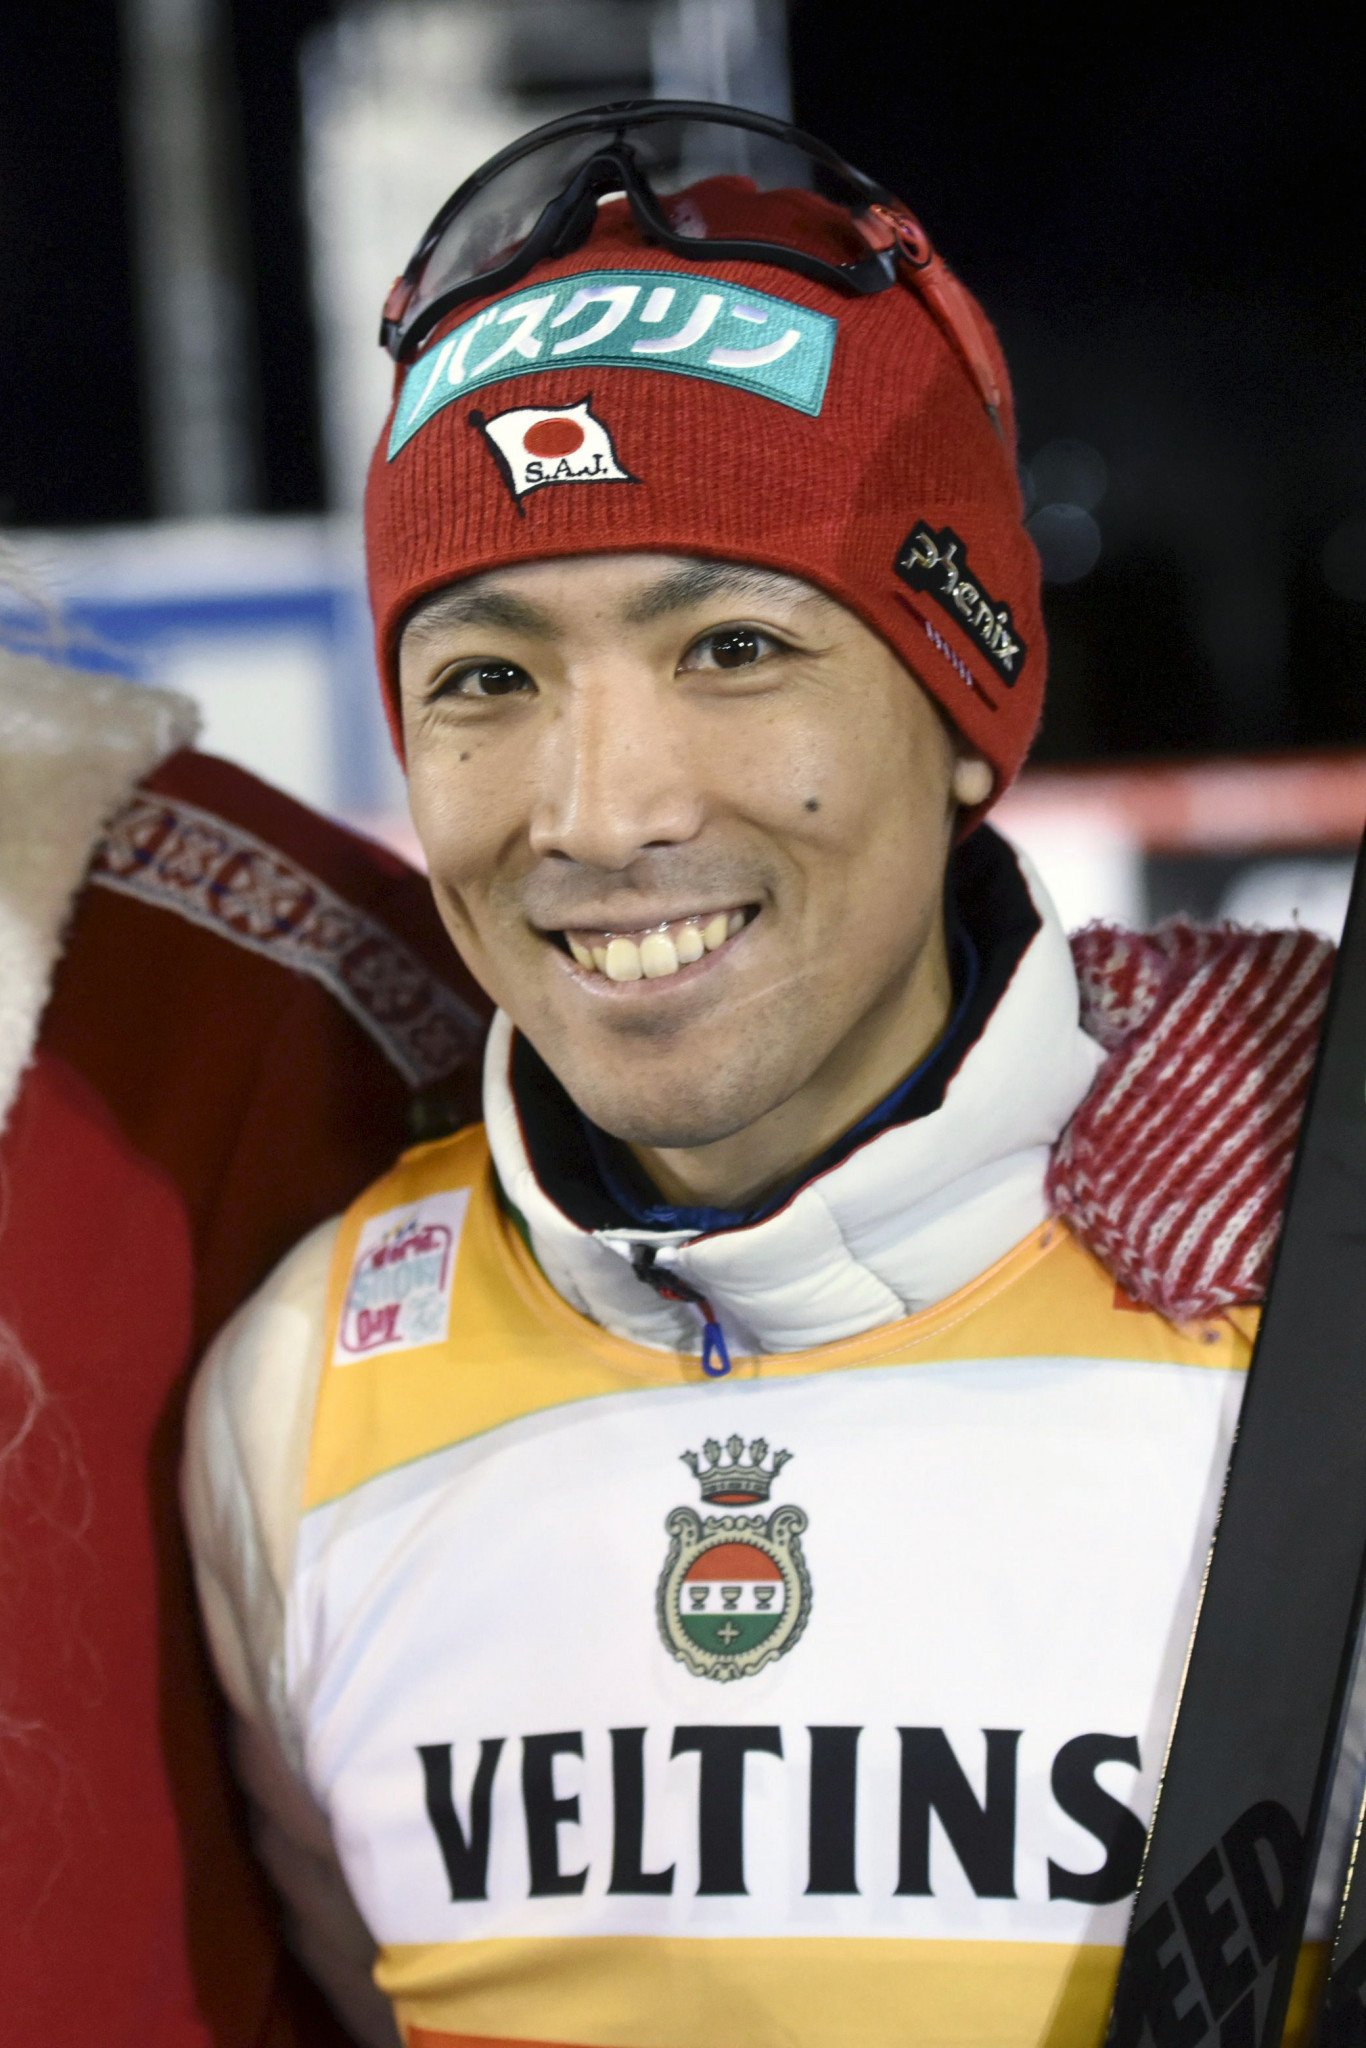 Watabe recovers from fall to clinch the Ruka Tour in FIS Nordic Combined World Cup